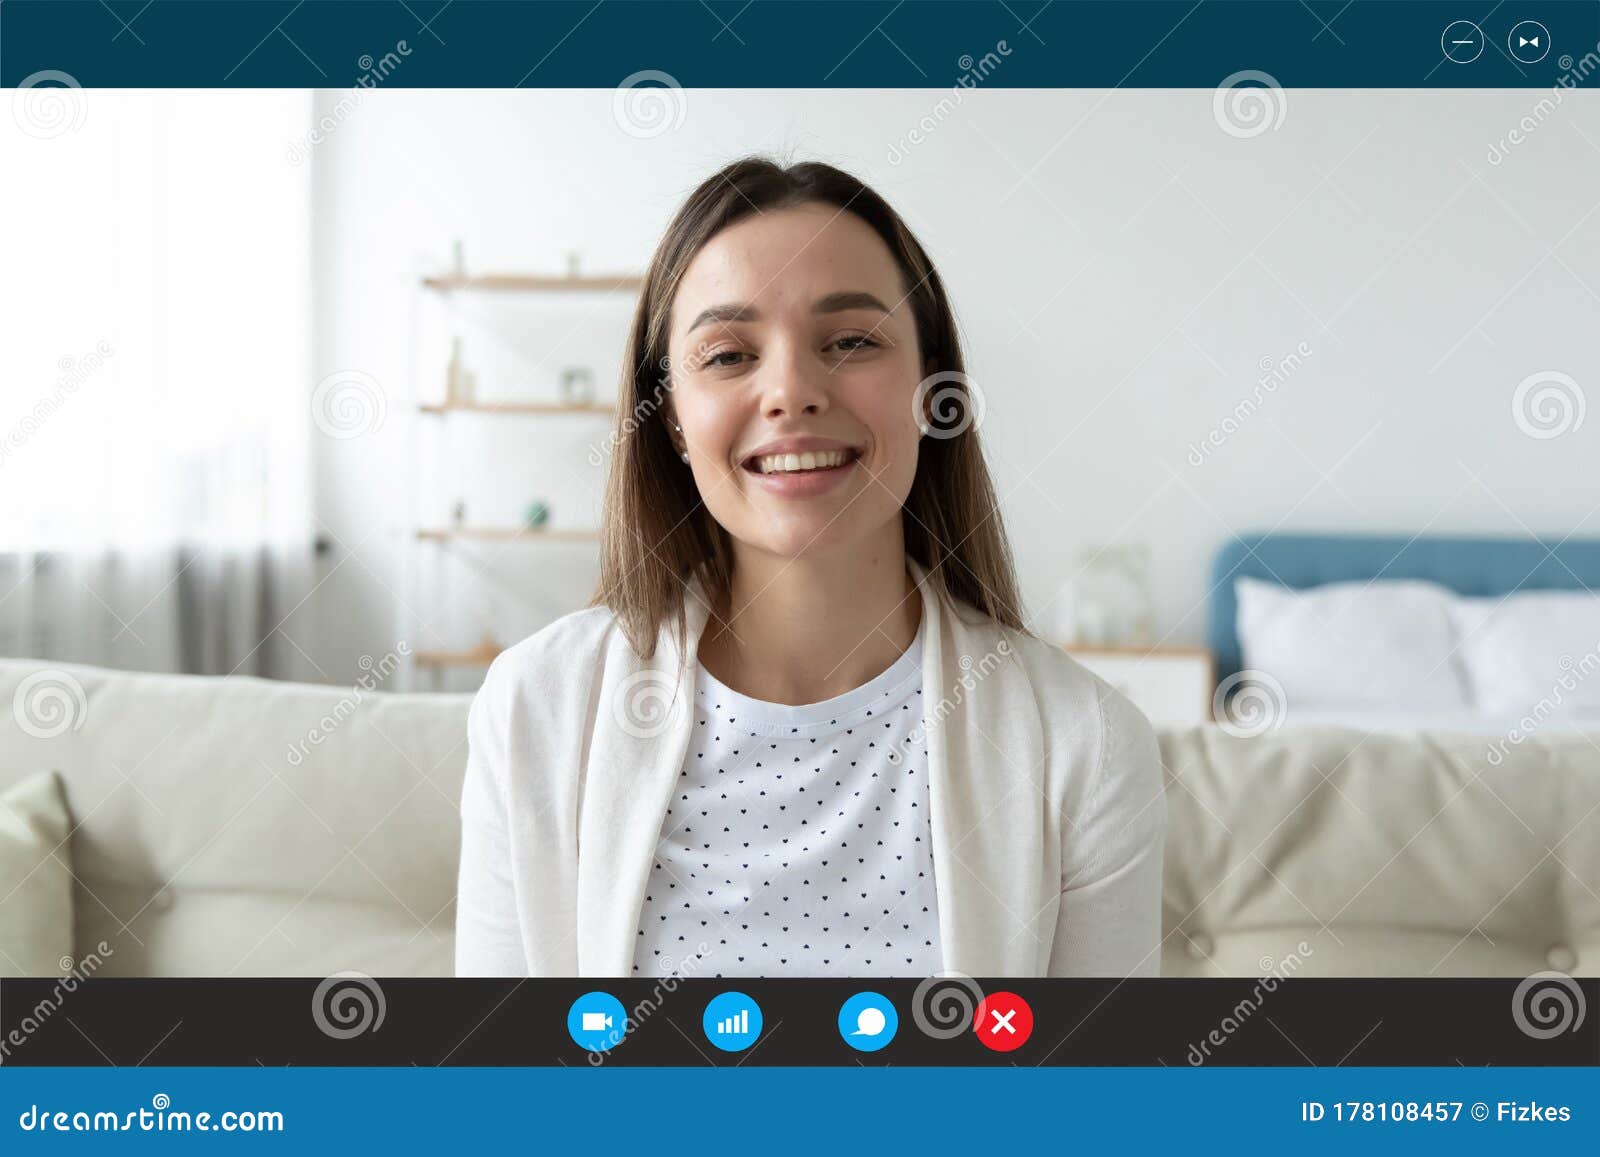 female psychologist provide psychological support to patient distantly by videocall